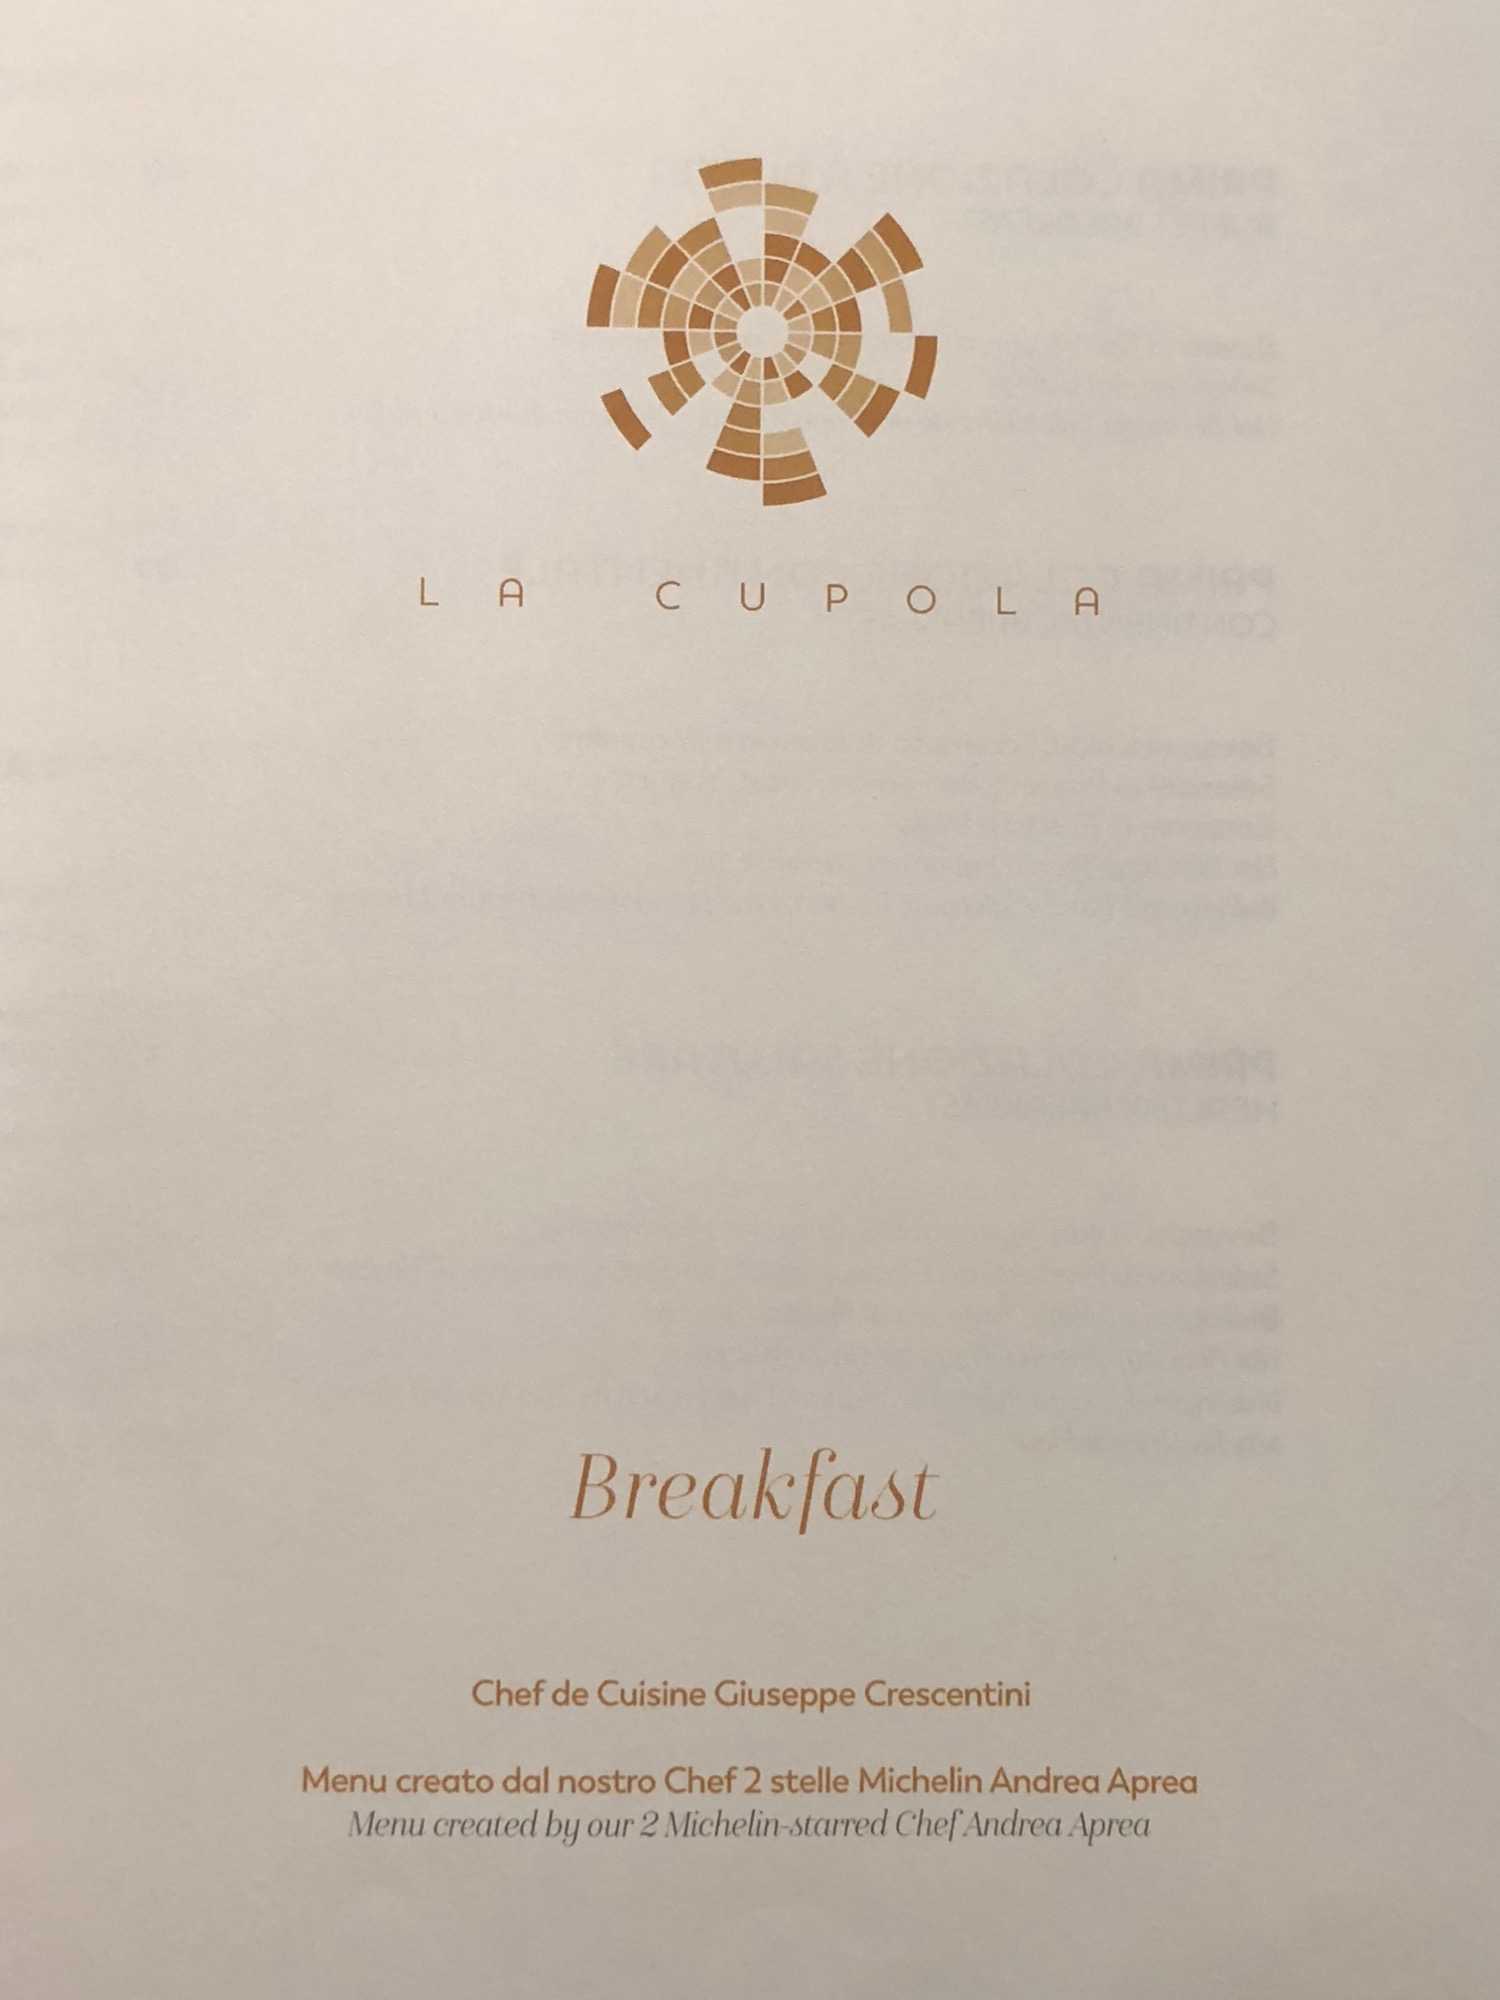 a menu with a logo and text